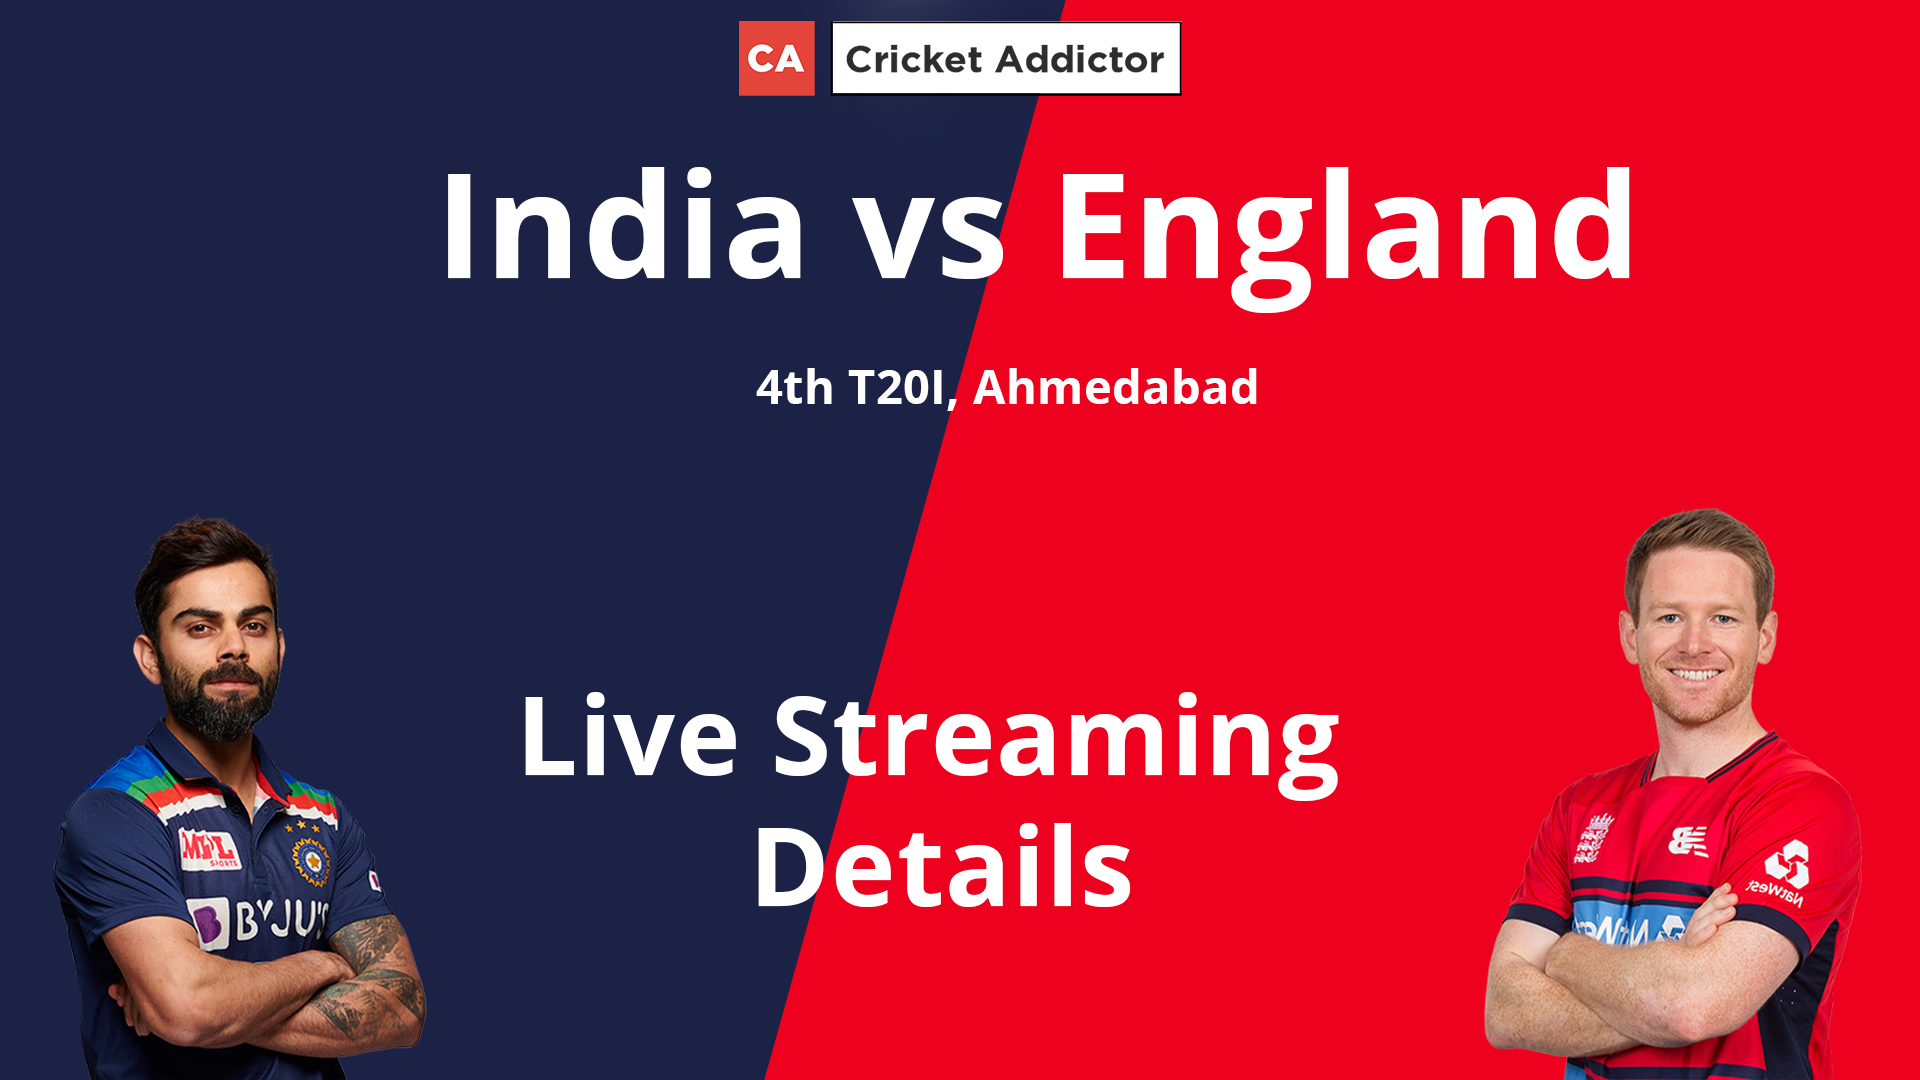 India vs England 2021, 4th T20I: When And Where To Watch, Live Streaming Details